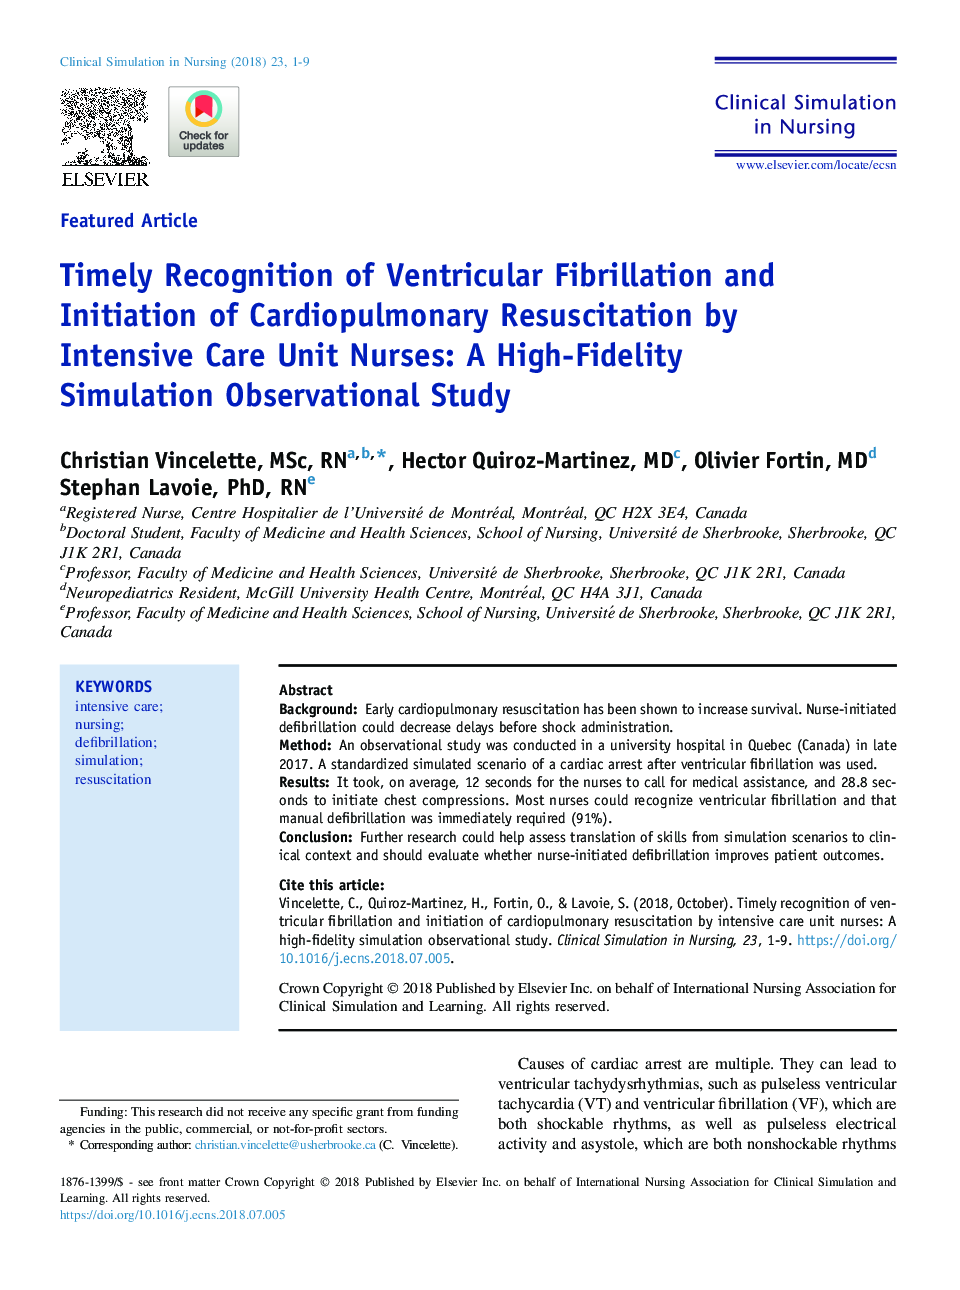 Timely Recognition of Ventricular Fibrillation and Initiation of Cardiopulmonary Resuscitation by Intensive Care Unit Nurses: A High-Fidelity Simulation Observational Study